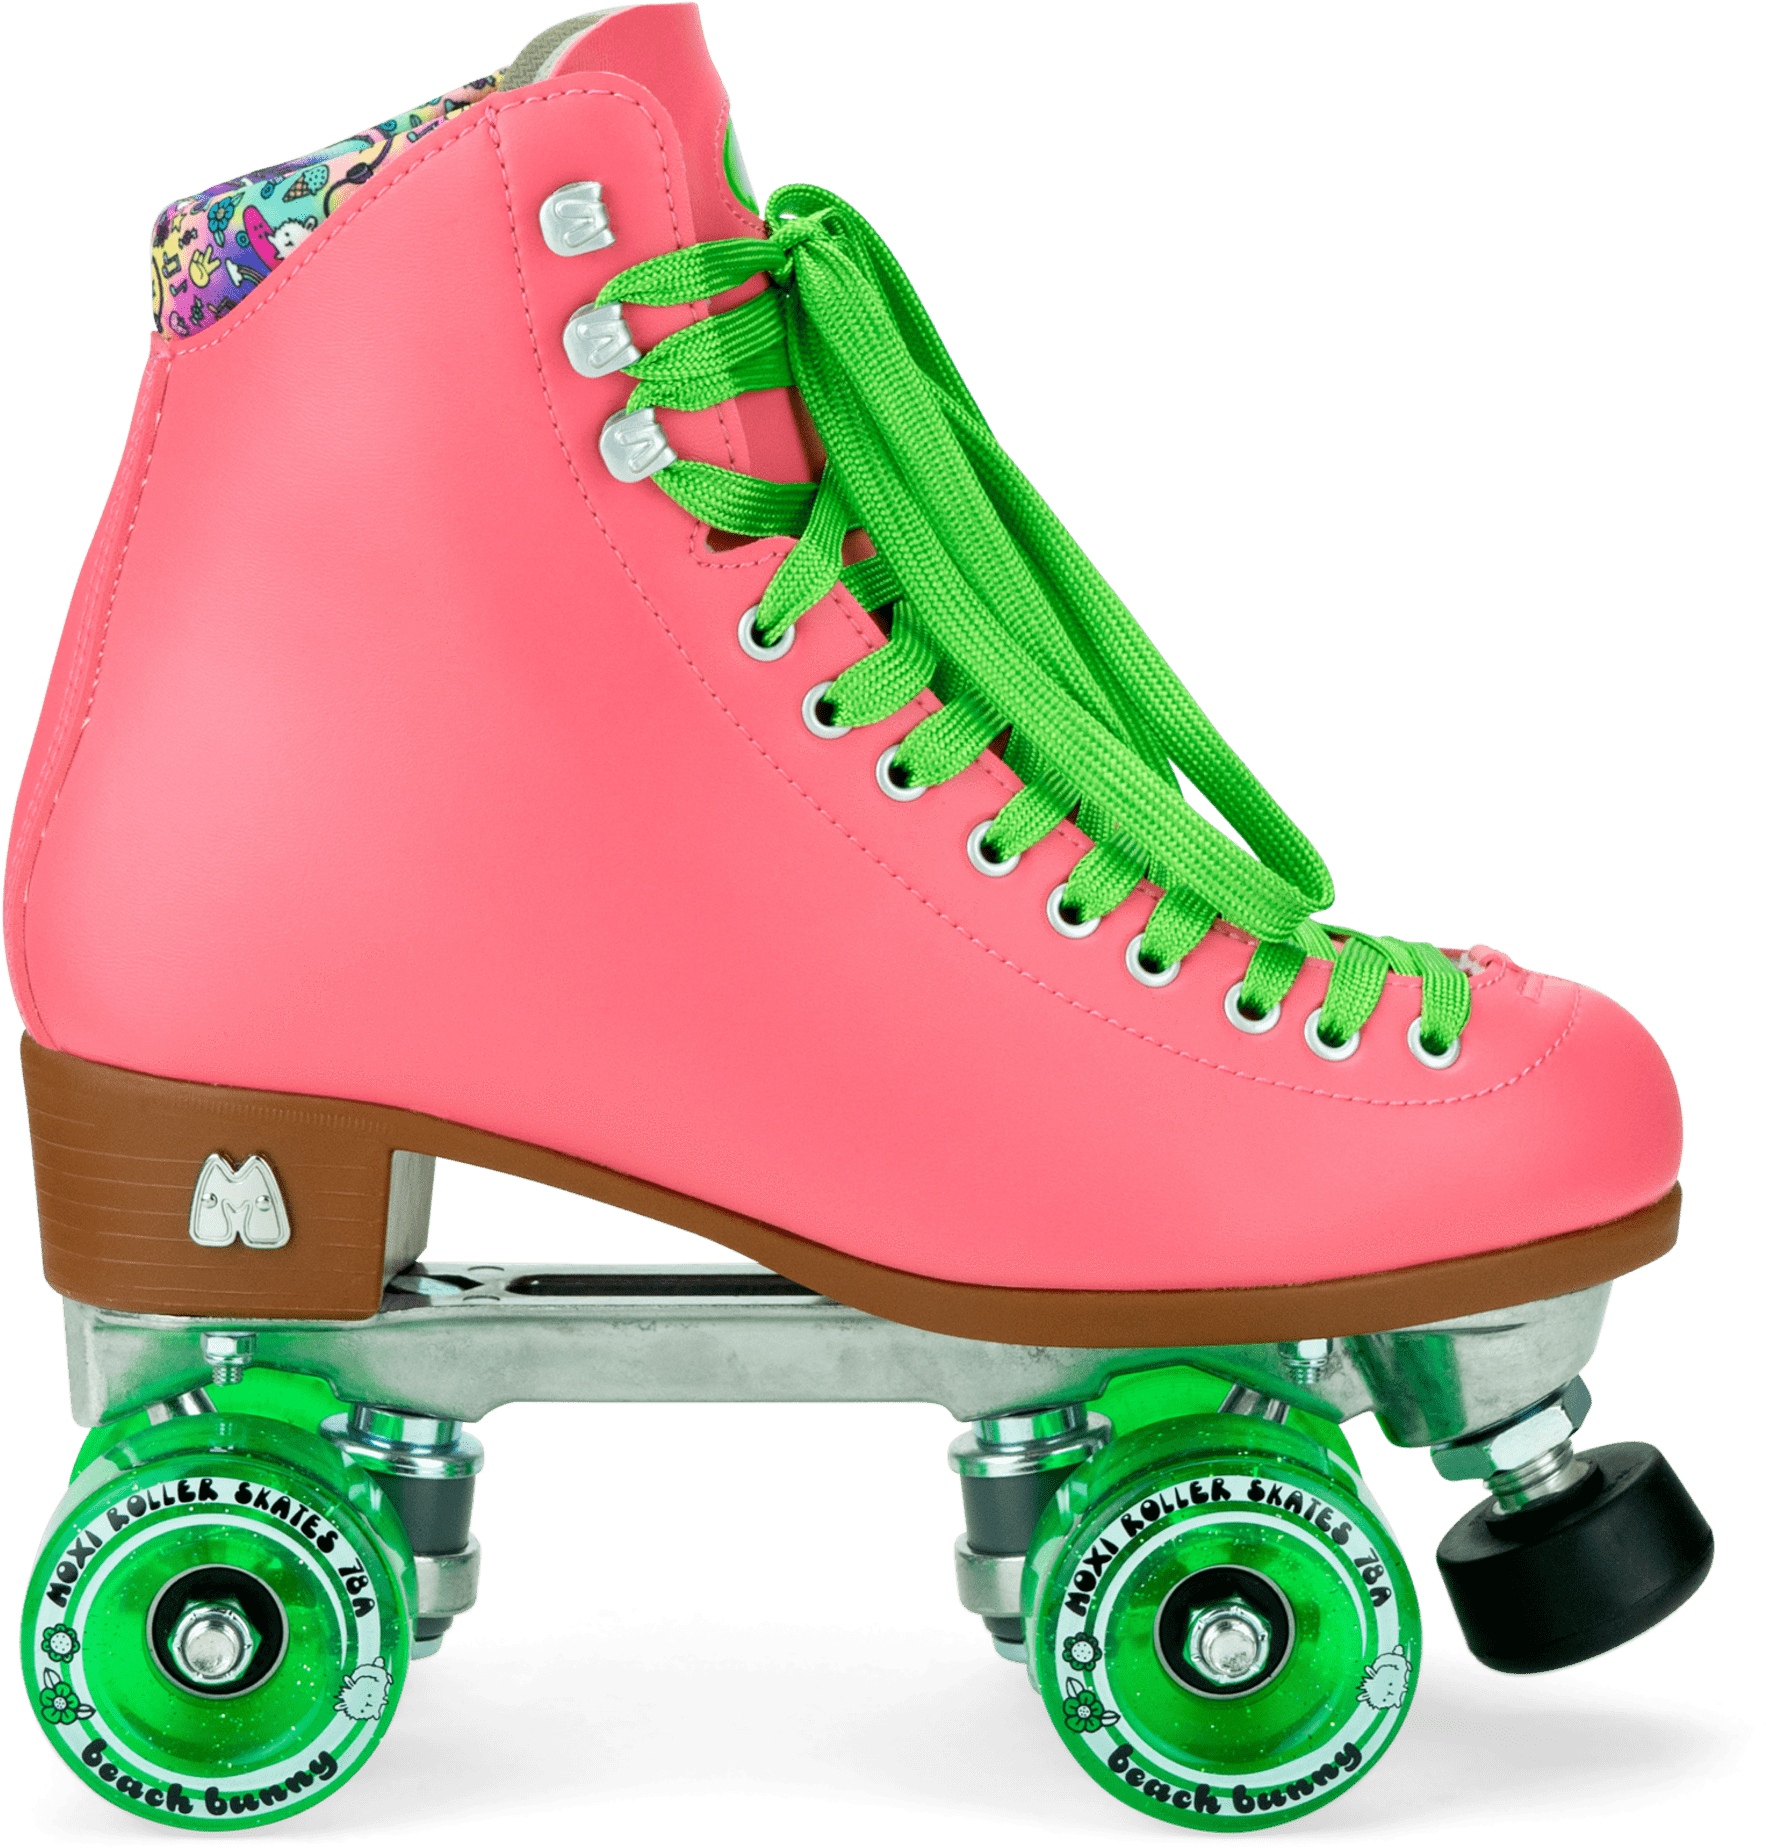 A Pink Roller Skate With Green Wheels